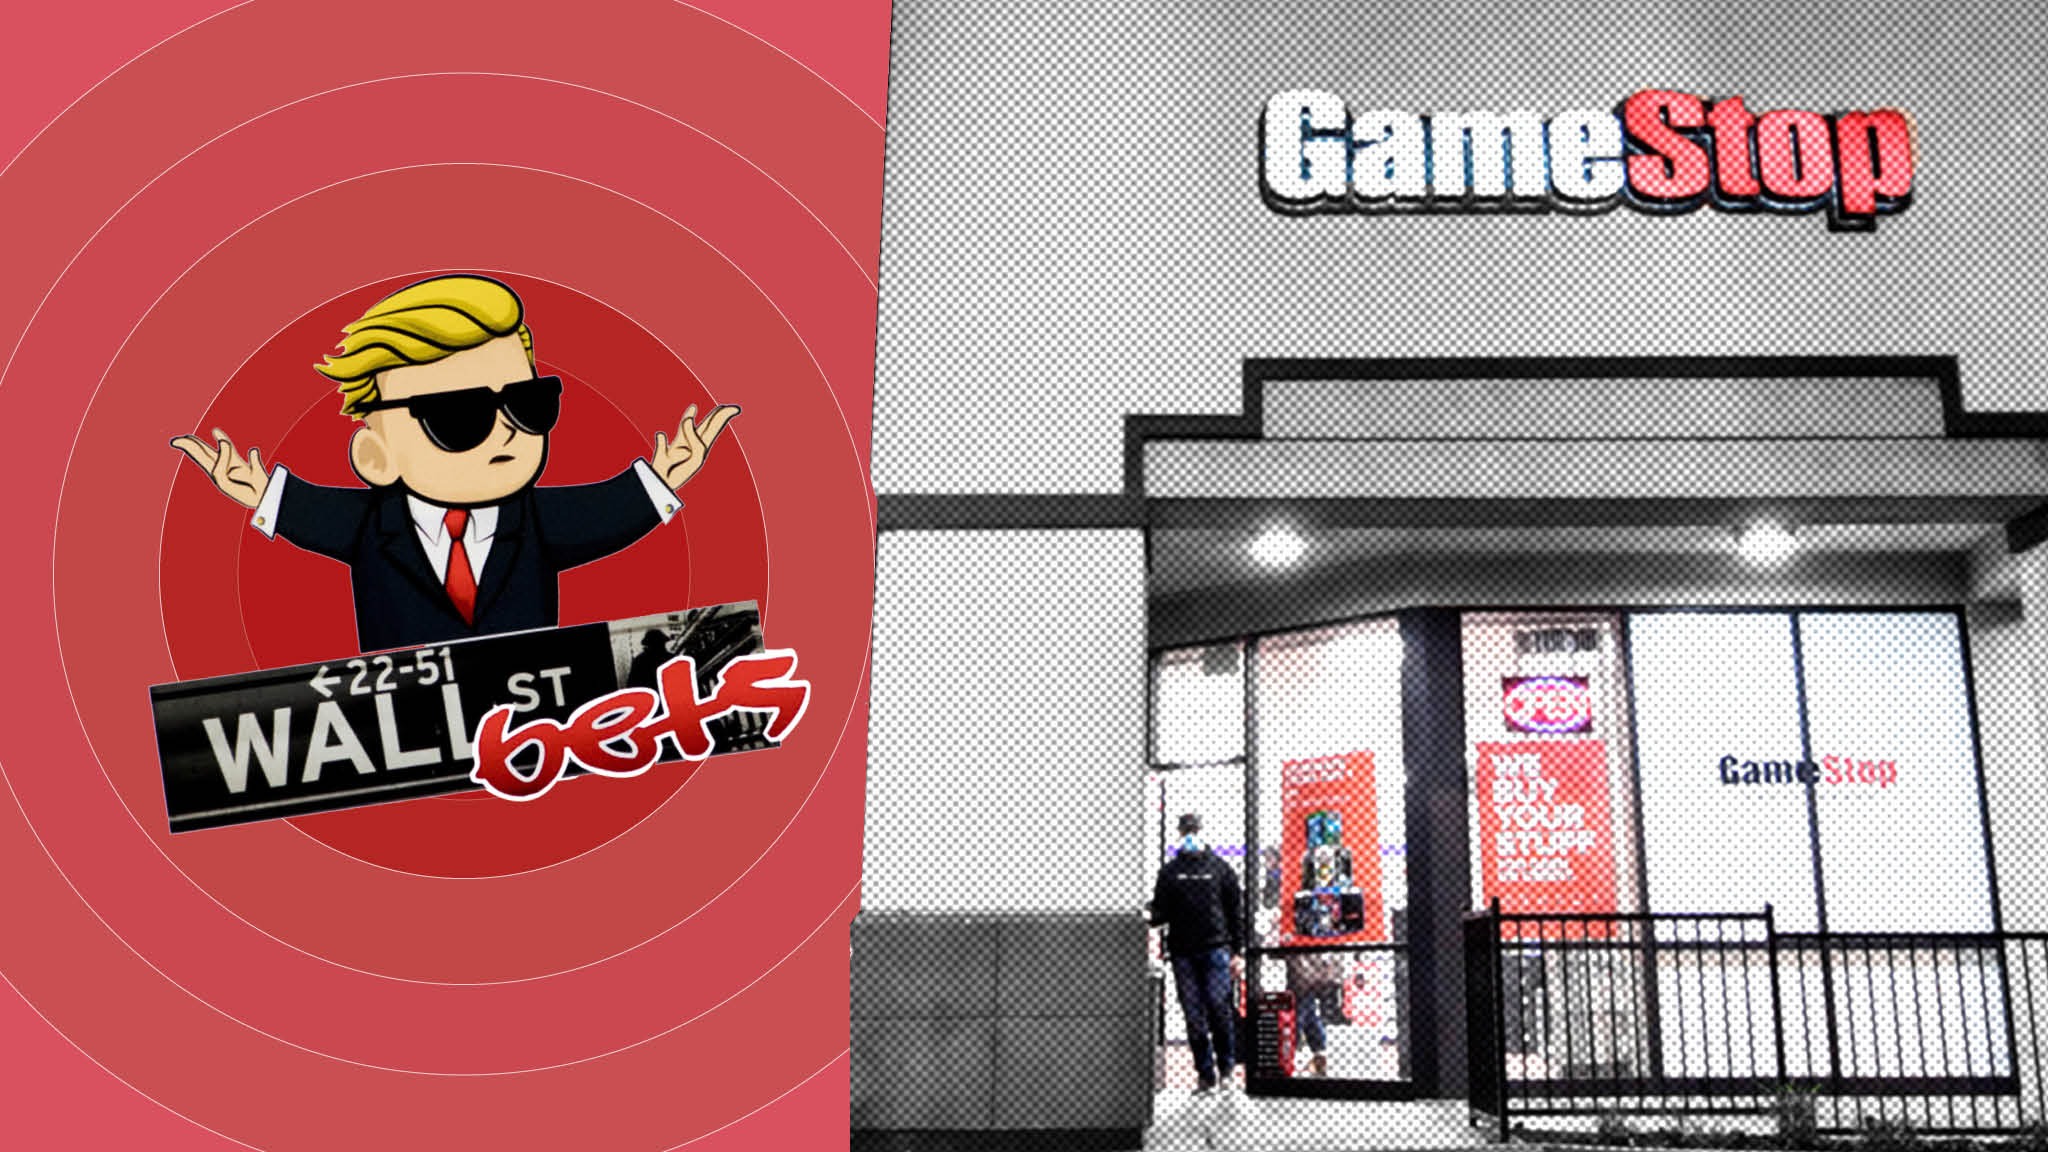 Gamestop S Wild Ride How Reddit Traders Sparked A Short Squeeze Financial Times